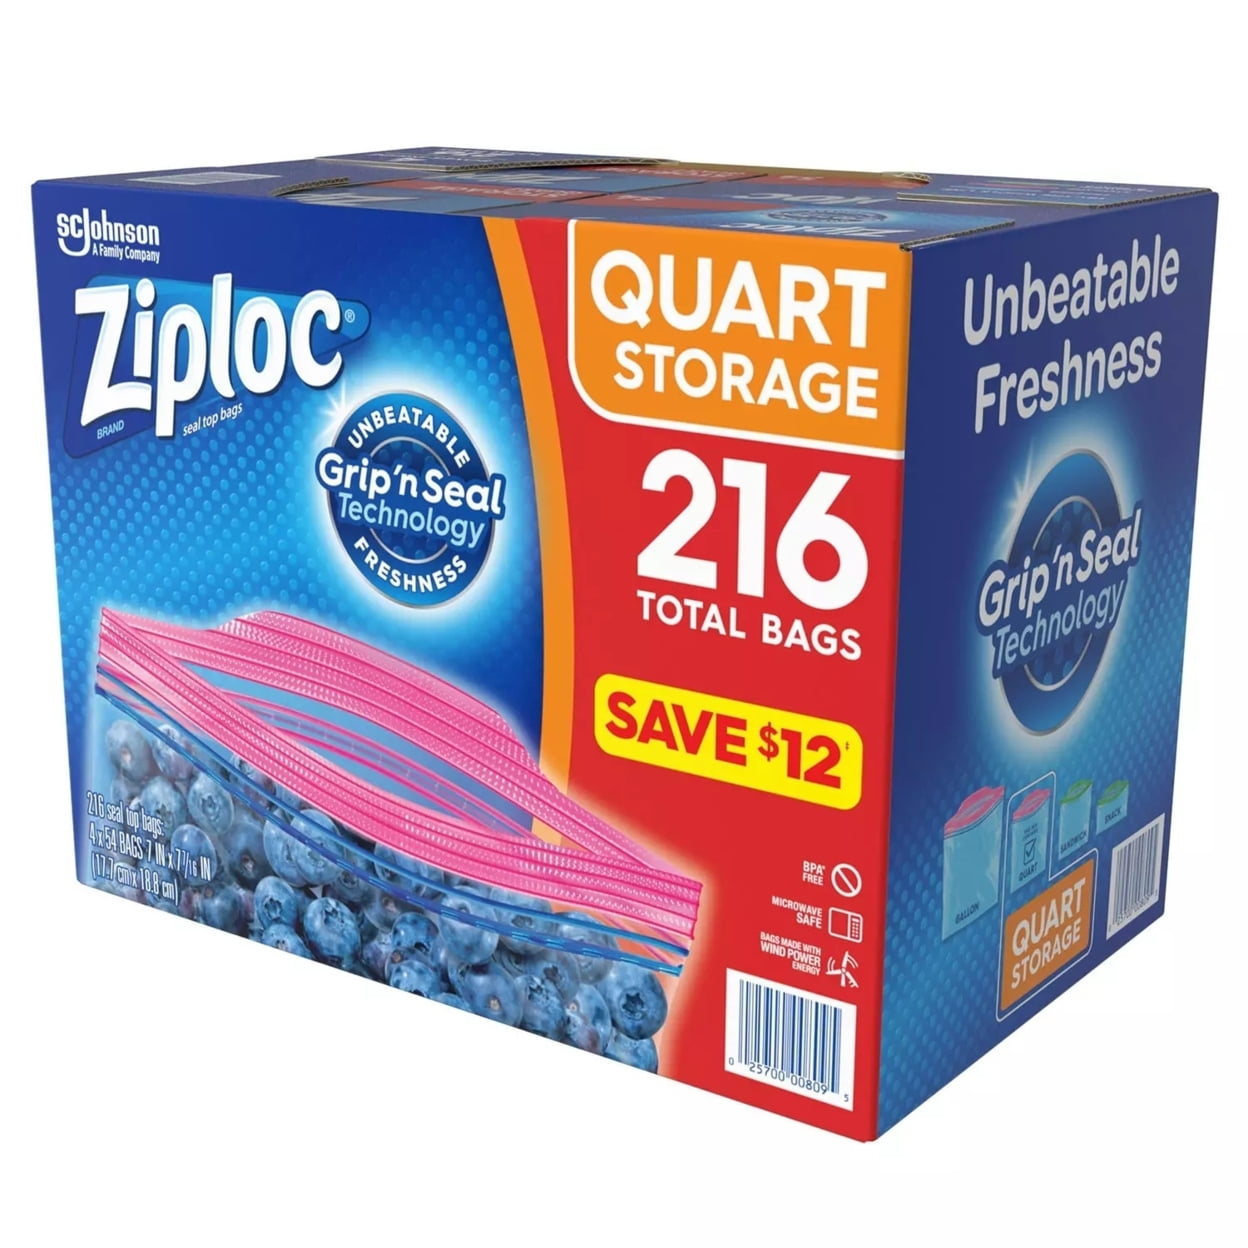 Ziploc® Grip N Seal™ Technology Quart Storage Bags with New Stay Open  Design, 24 ct - Food 4 Less